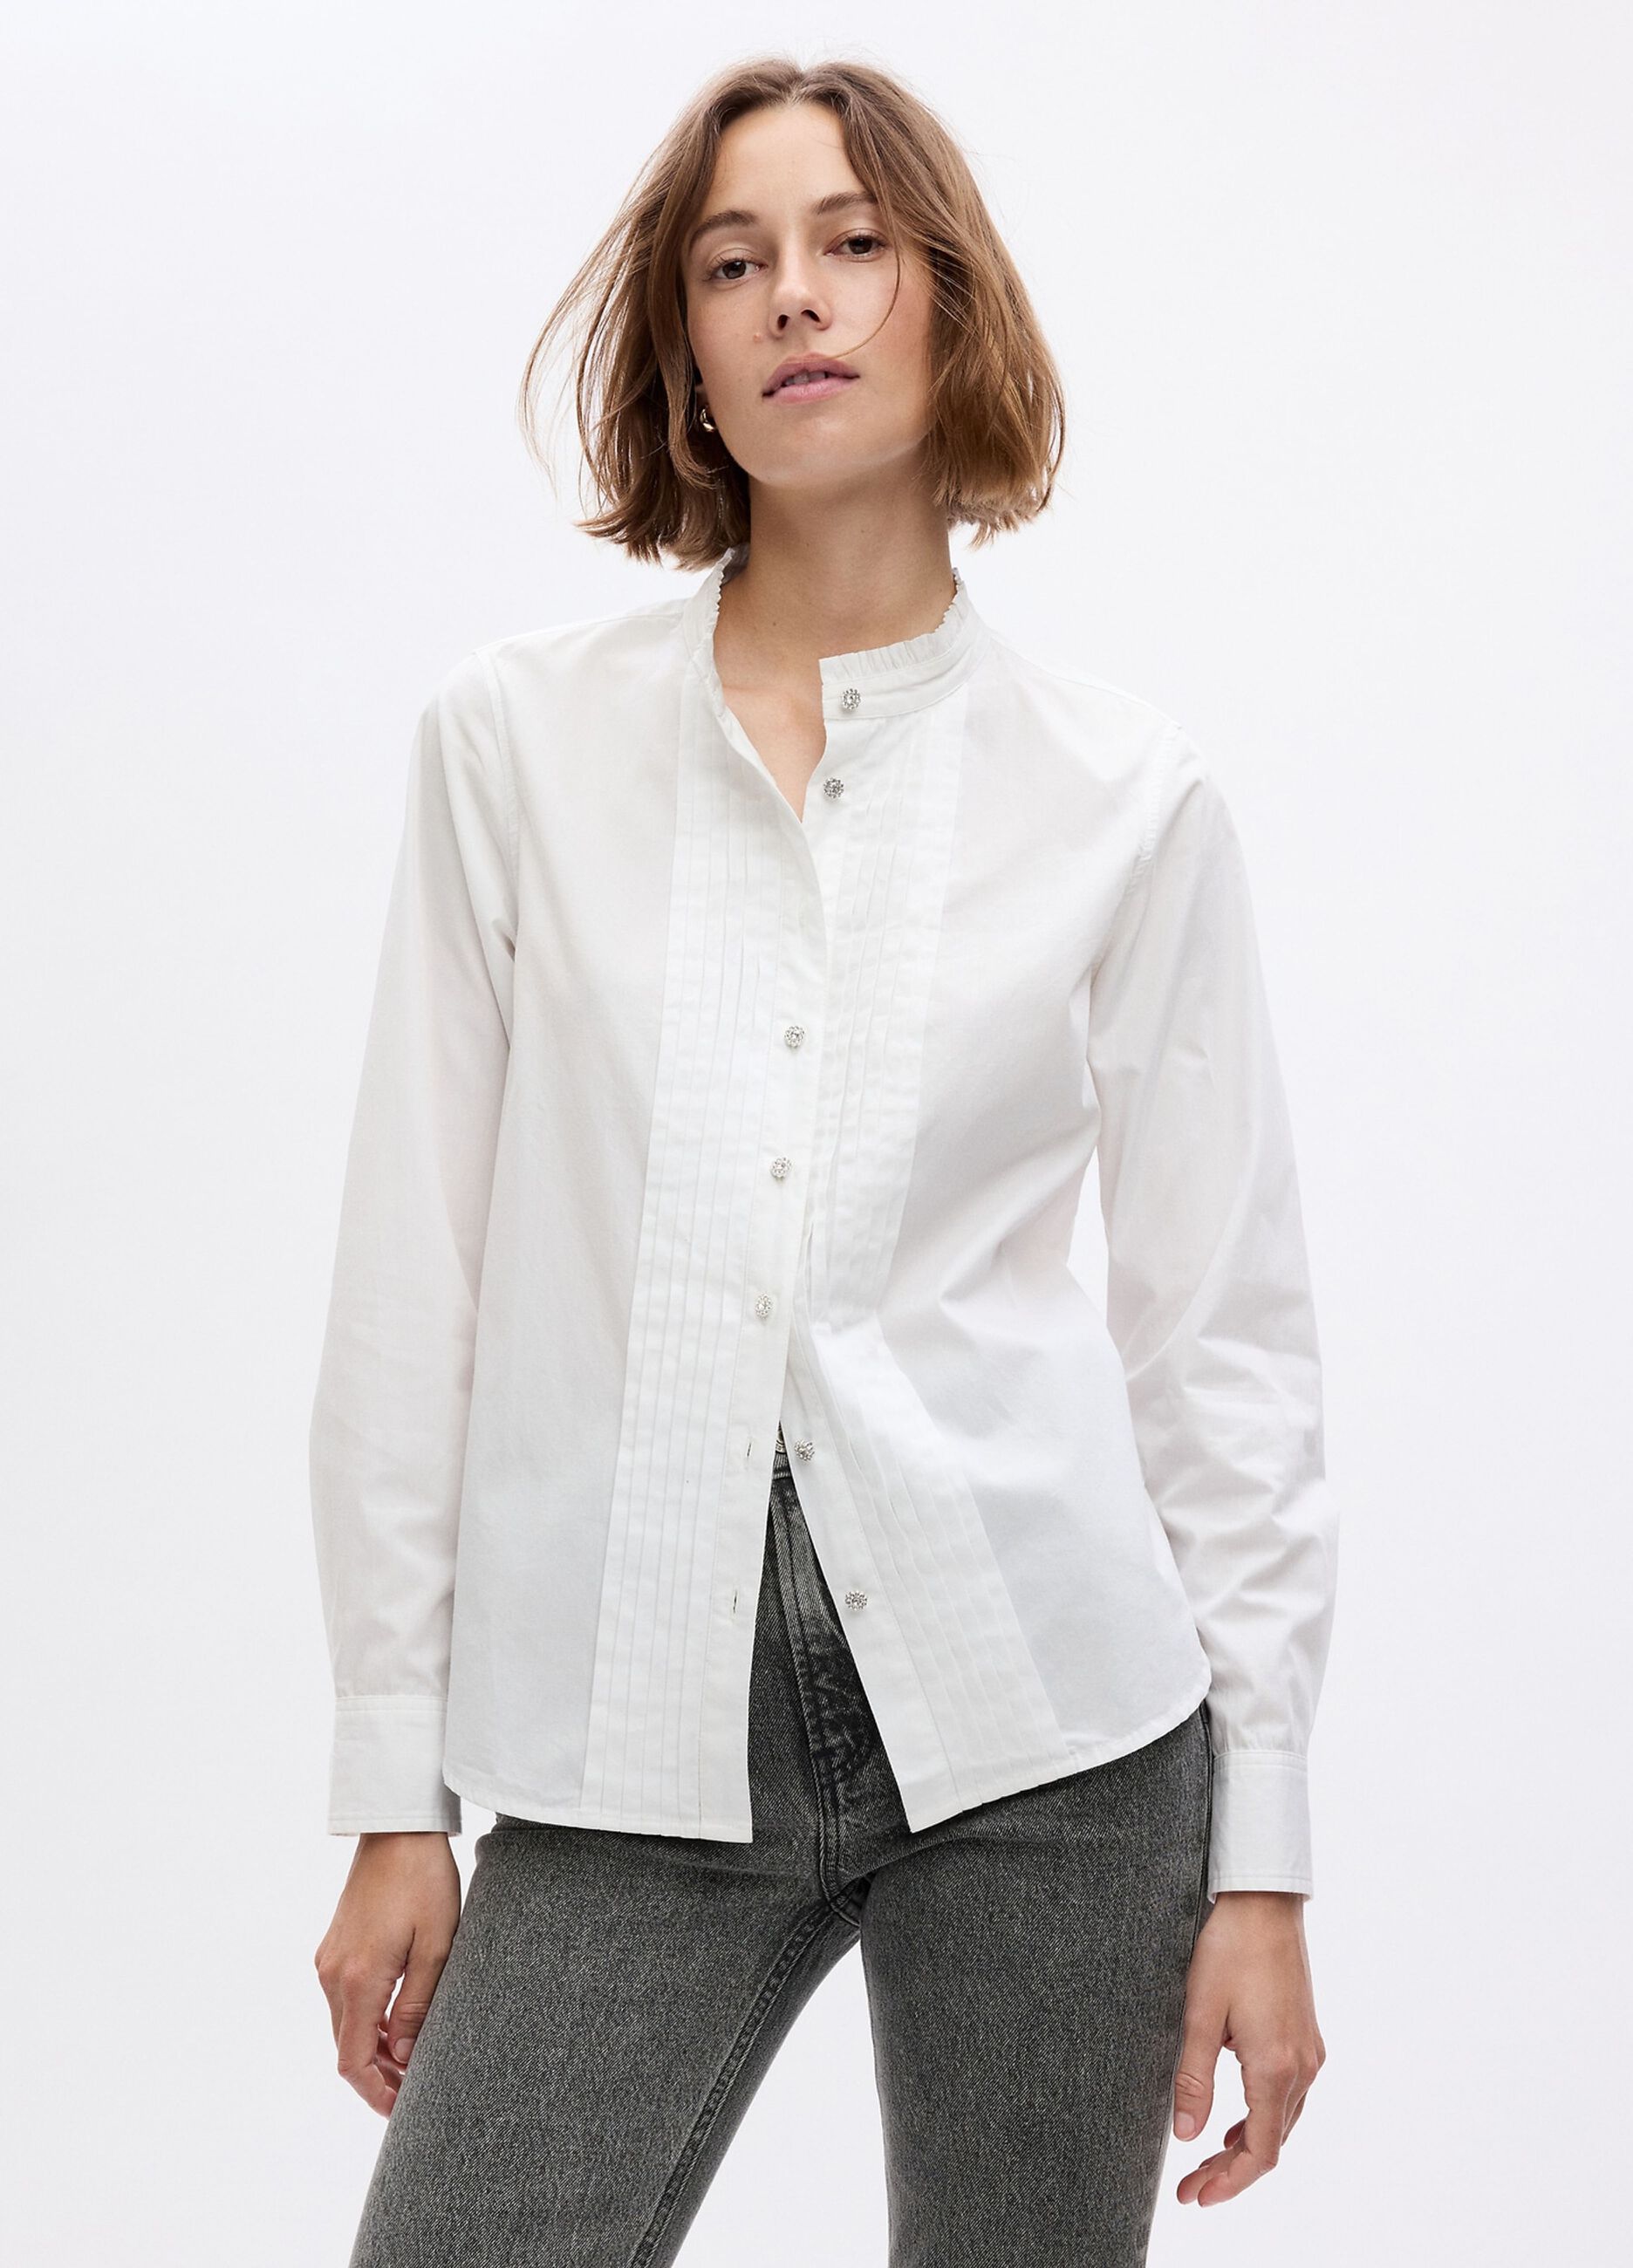 Organic cotton shirt with jewel buttons